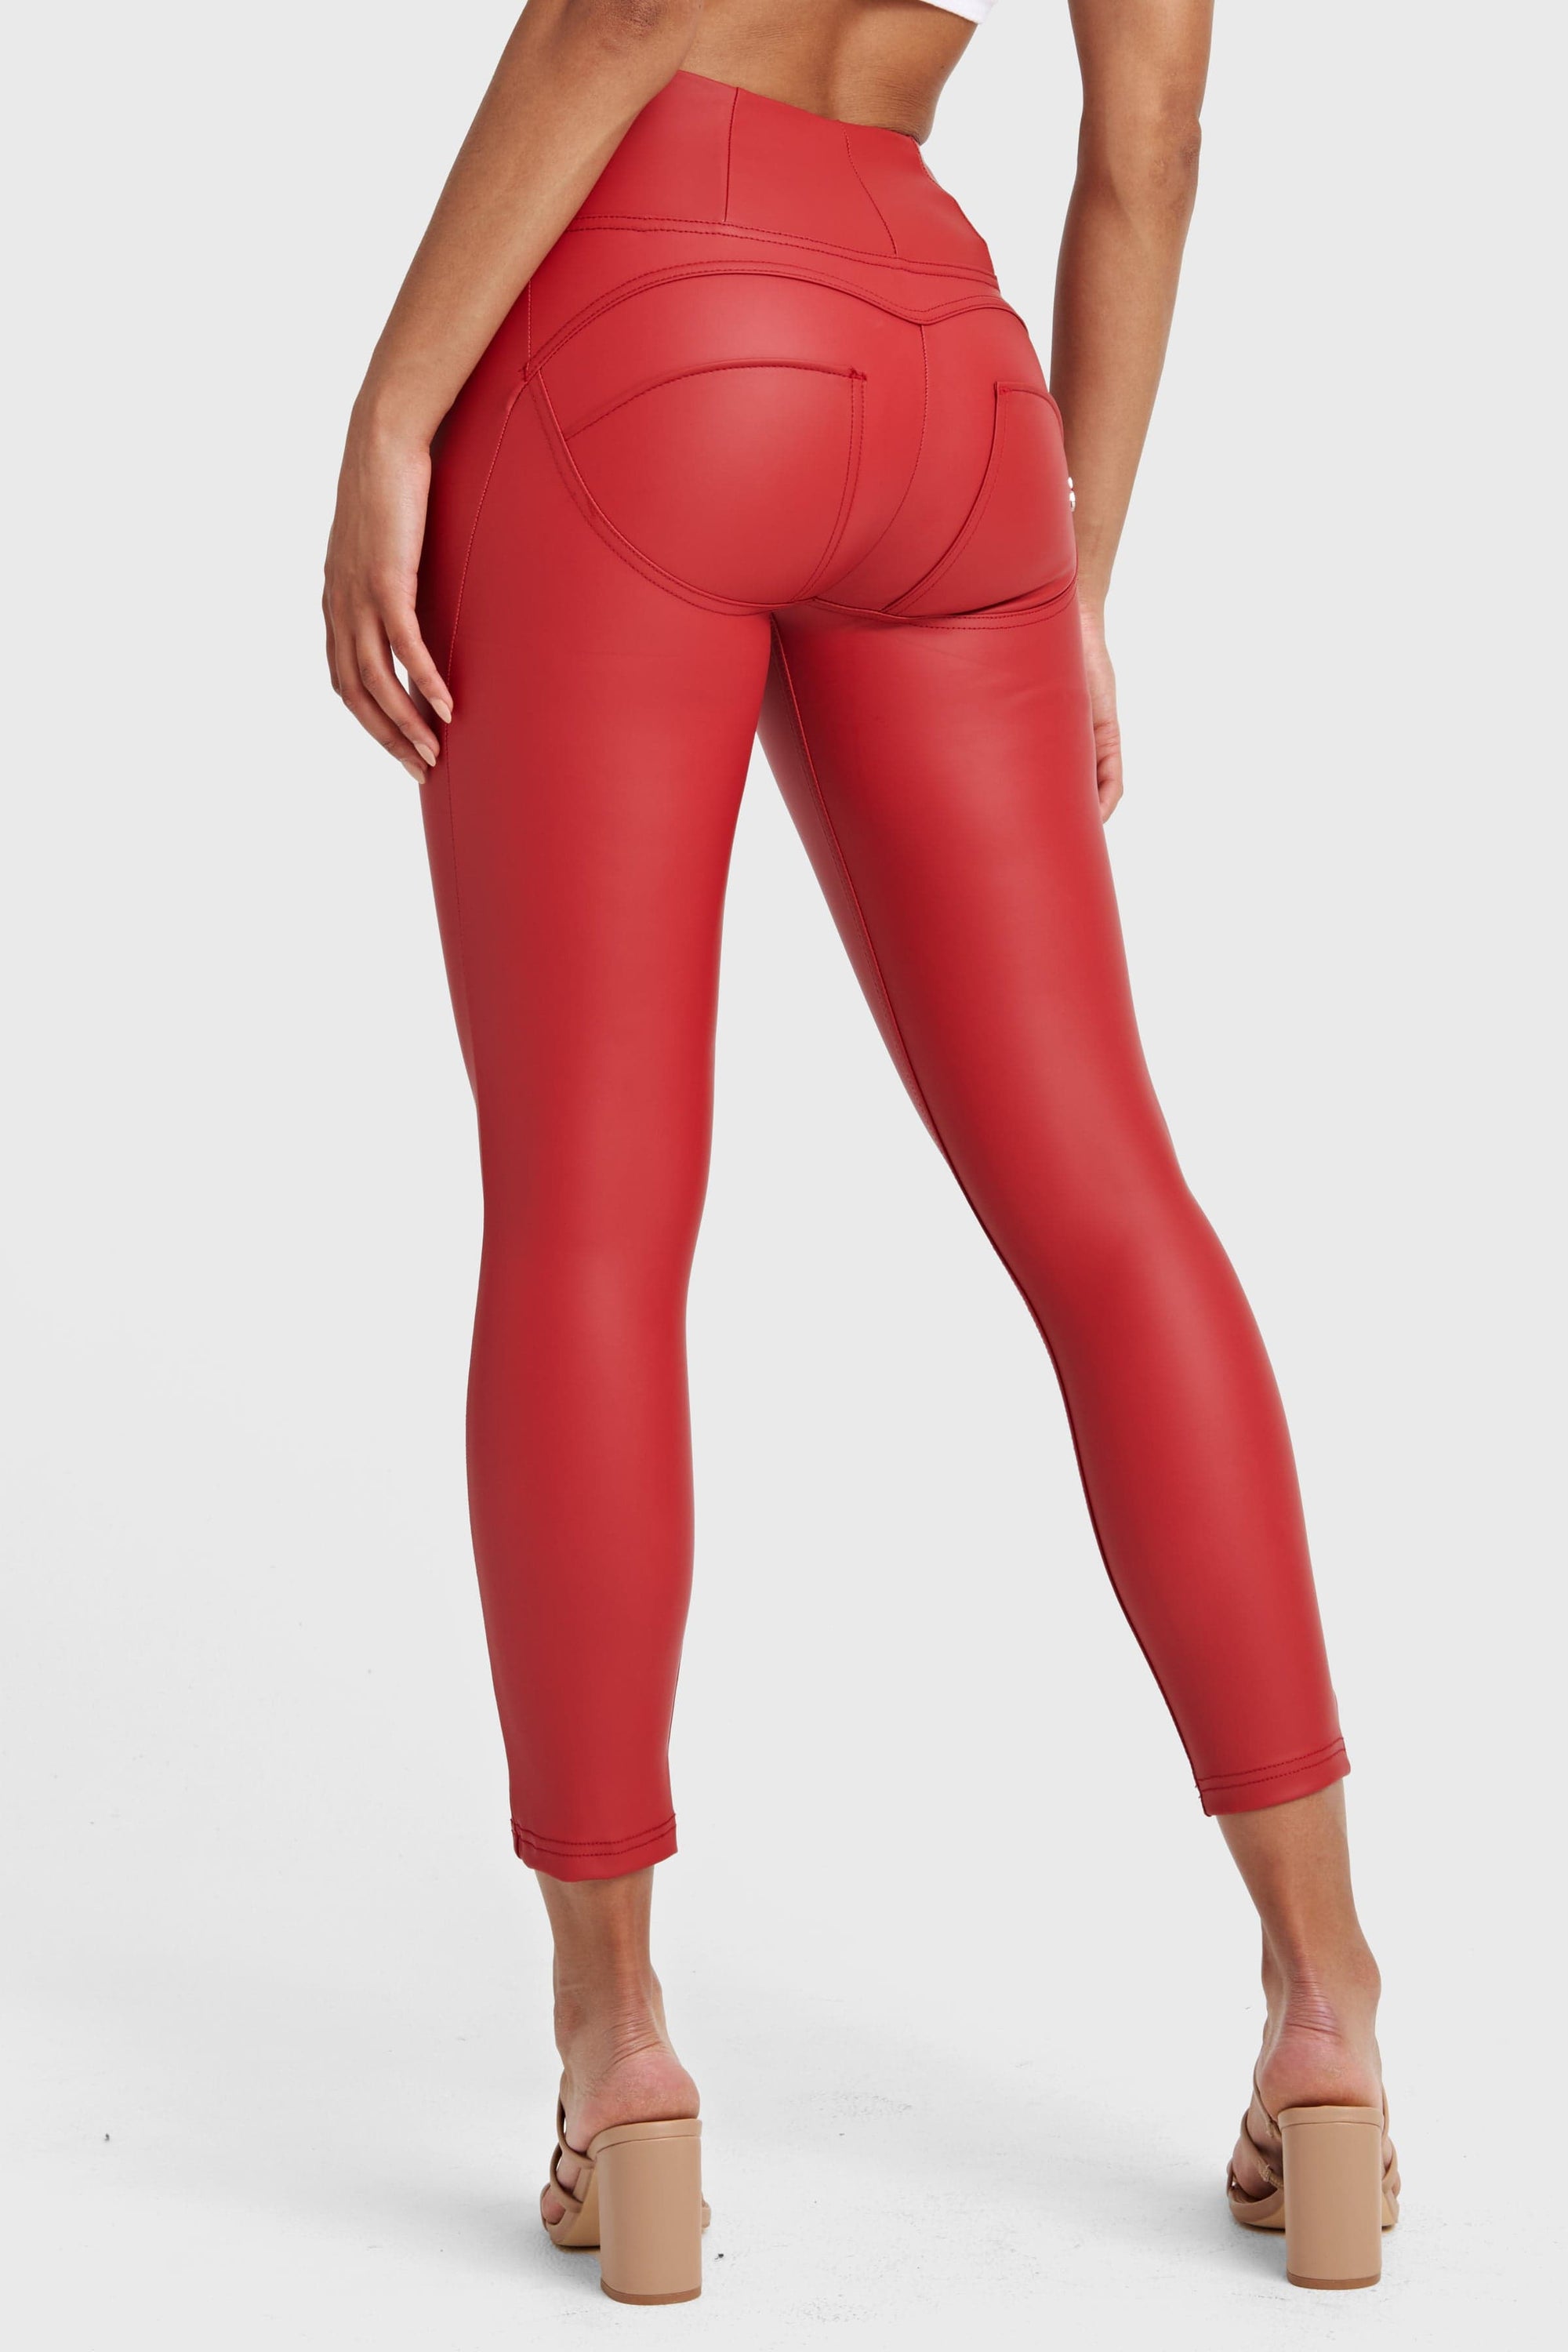 WR.UP® Faux Leather - High Waisted - 7/8 Length - Red 8